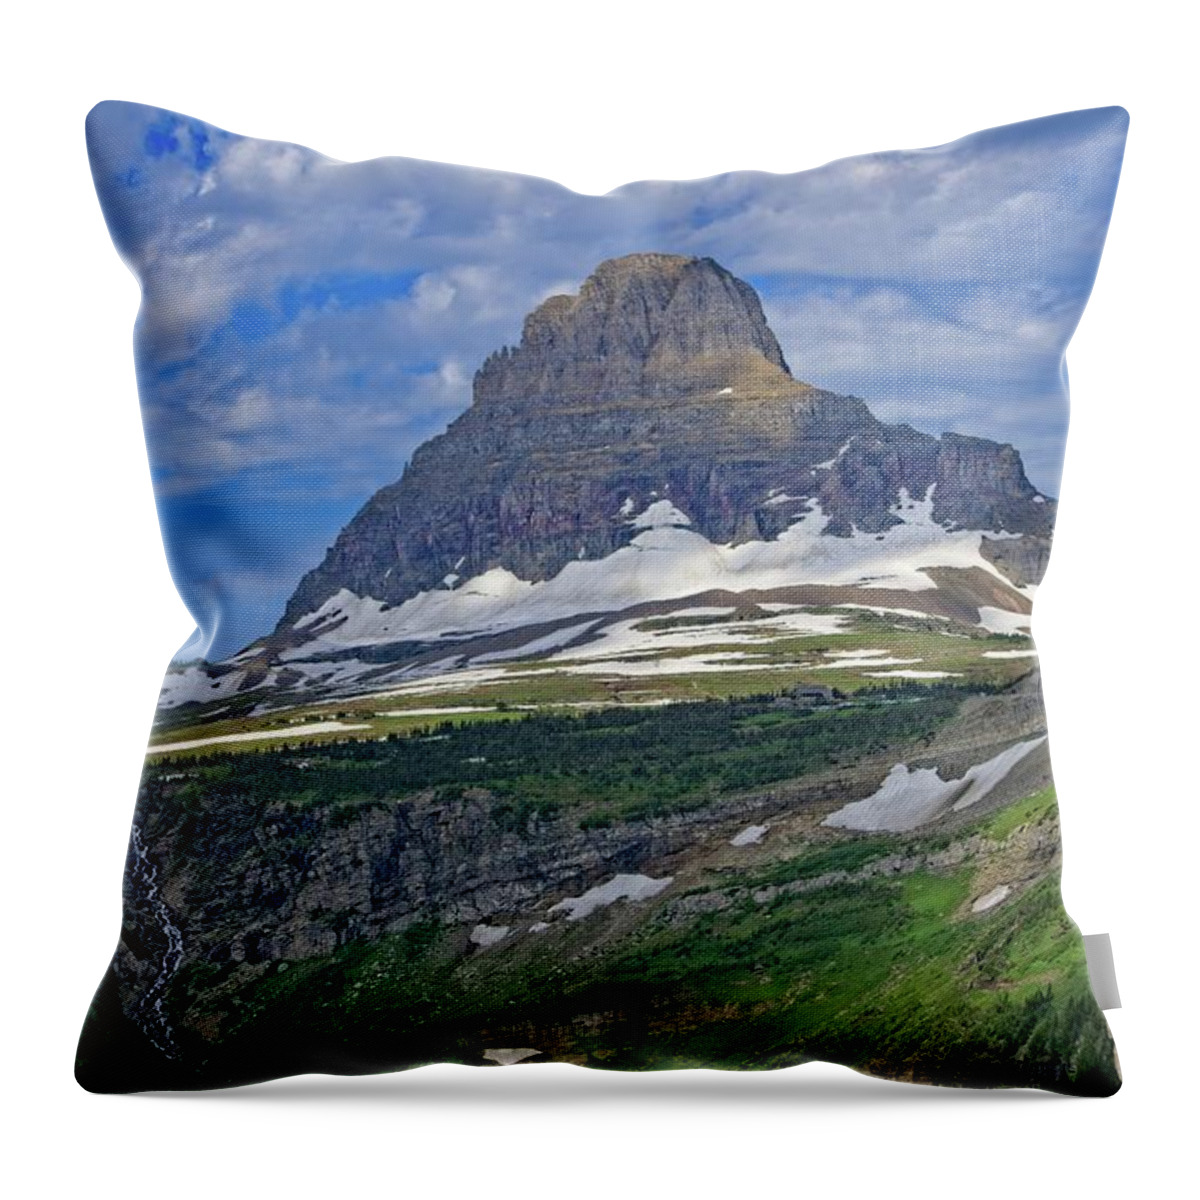 Aqua Throw Pillow featuring the photograph Majestic Clements by David Desautel